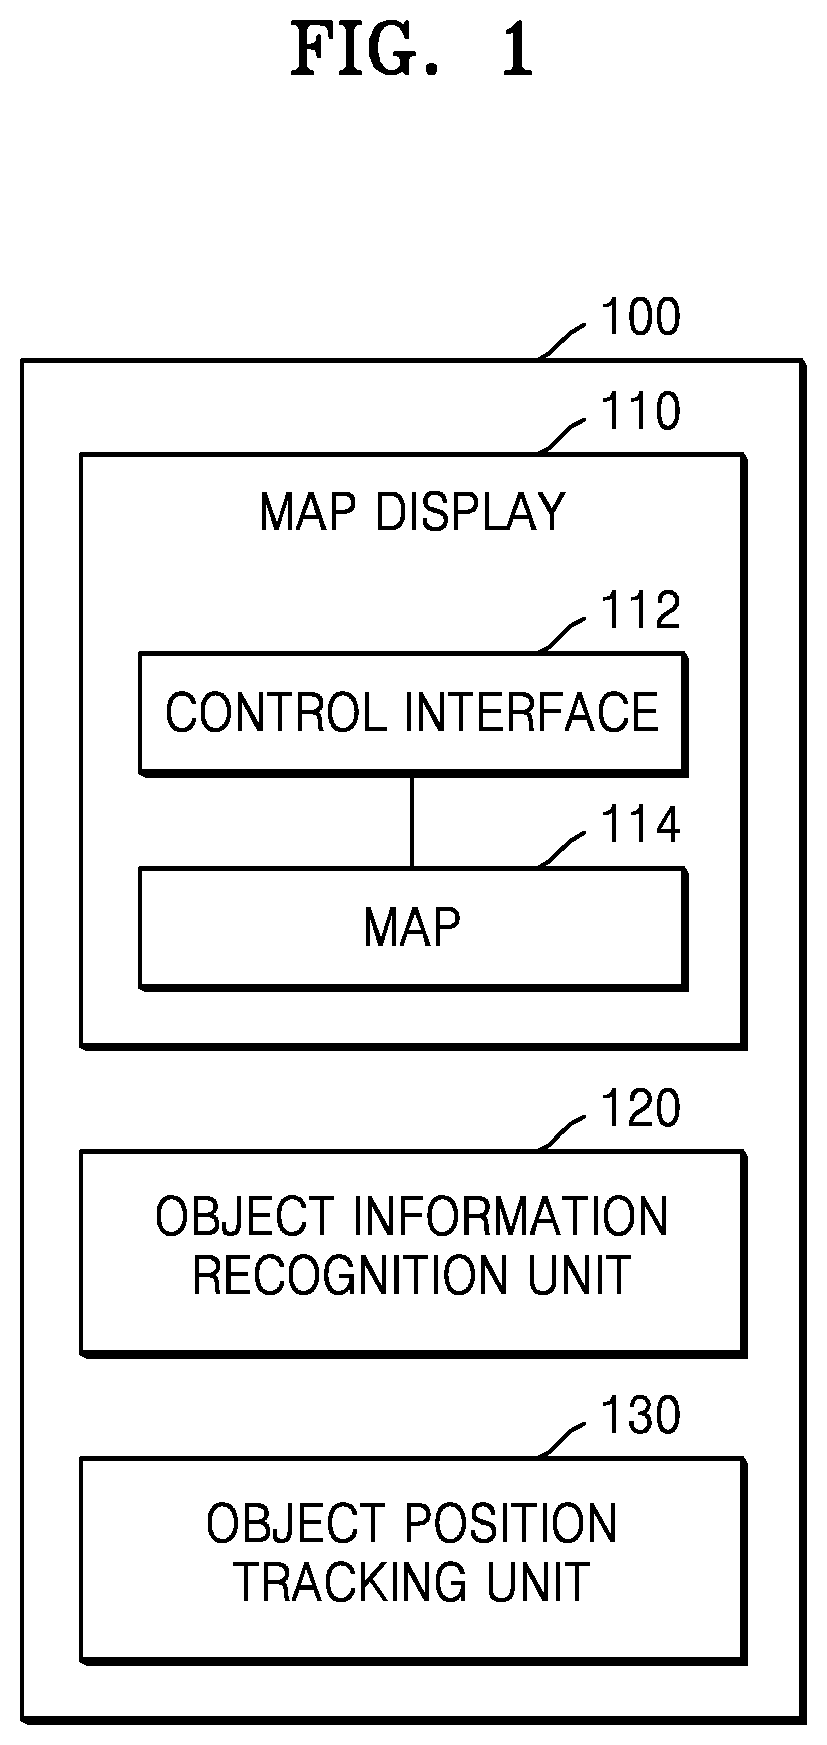 Method and apparatus for surveillance using location-tracking imaging devices